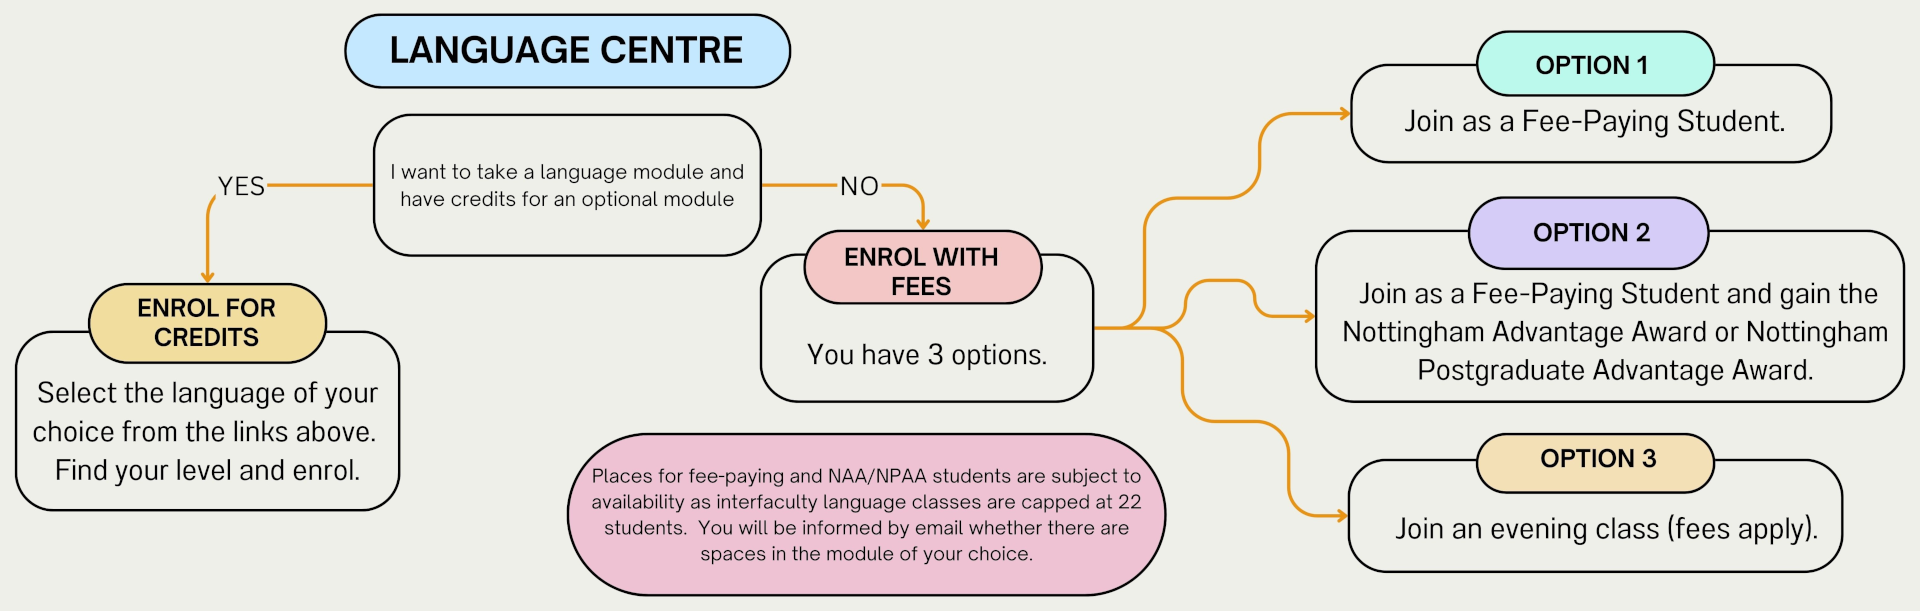 Flow chart showing options for fee paying language students. Details in text following the chart.